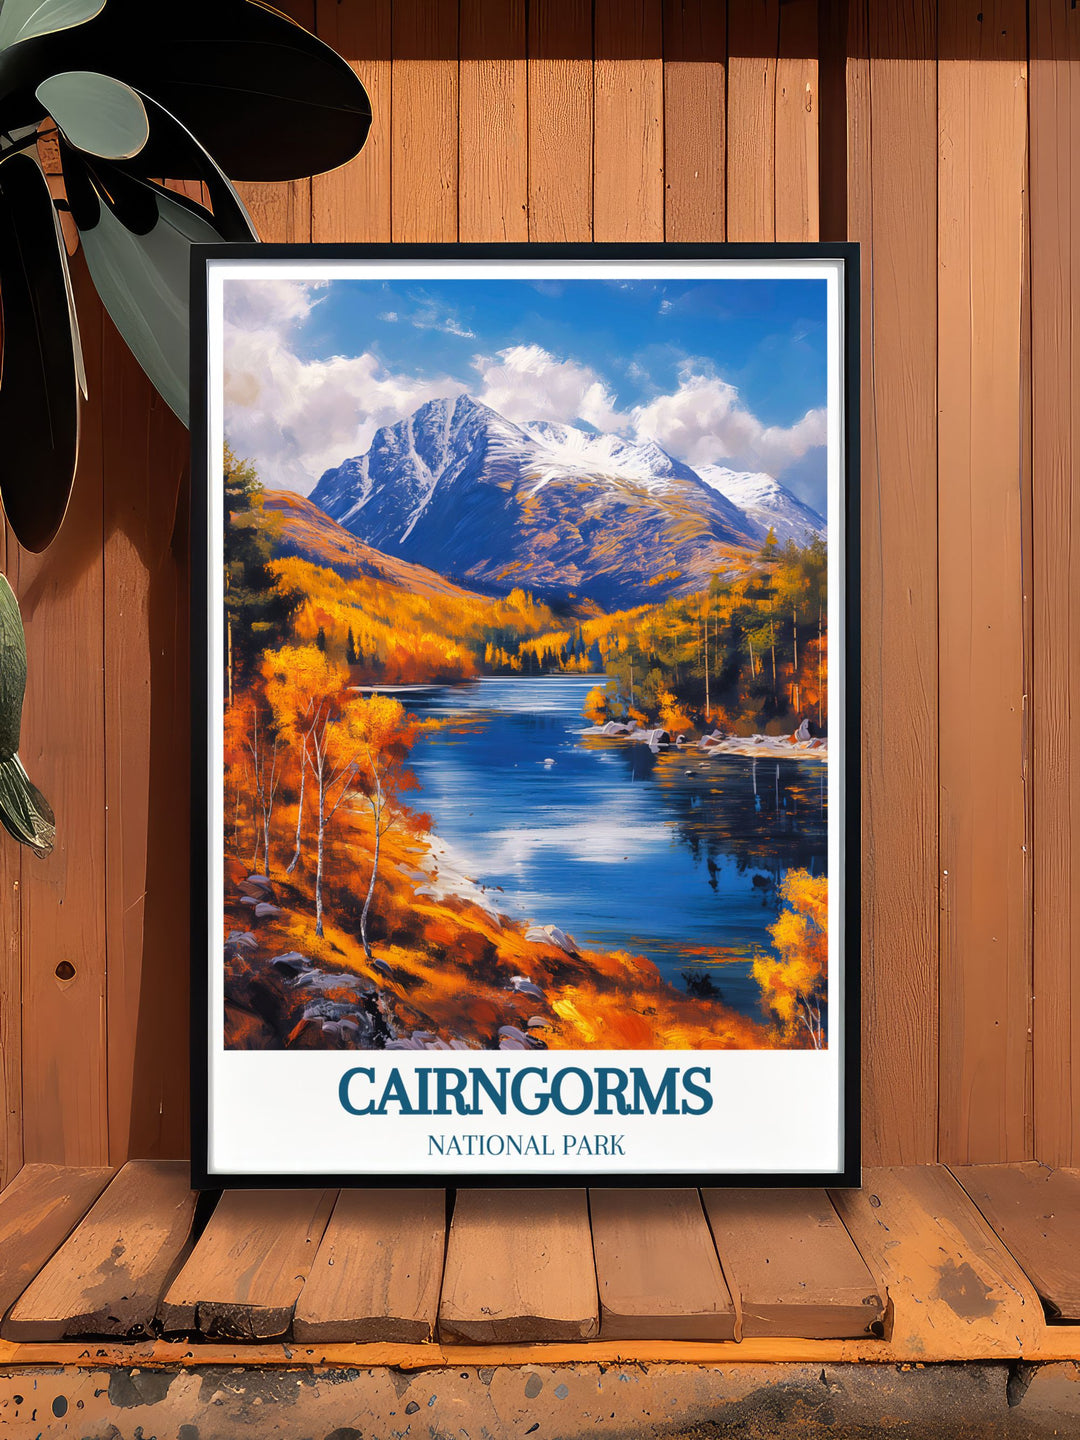 Featuring the scenic views of Cairngorms National Park and the historic Cairngorm Mountain, this poster offers a beautiful representation of Scotlands natural splendor and cultural heritage.